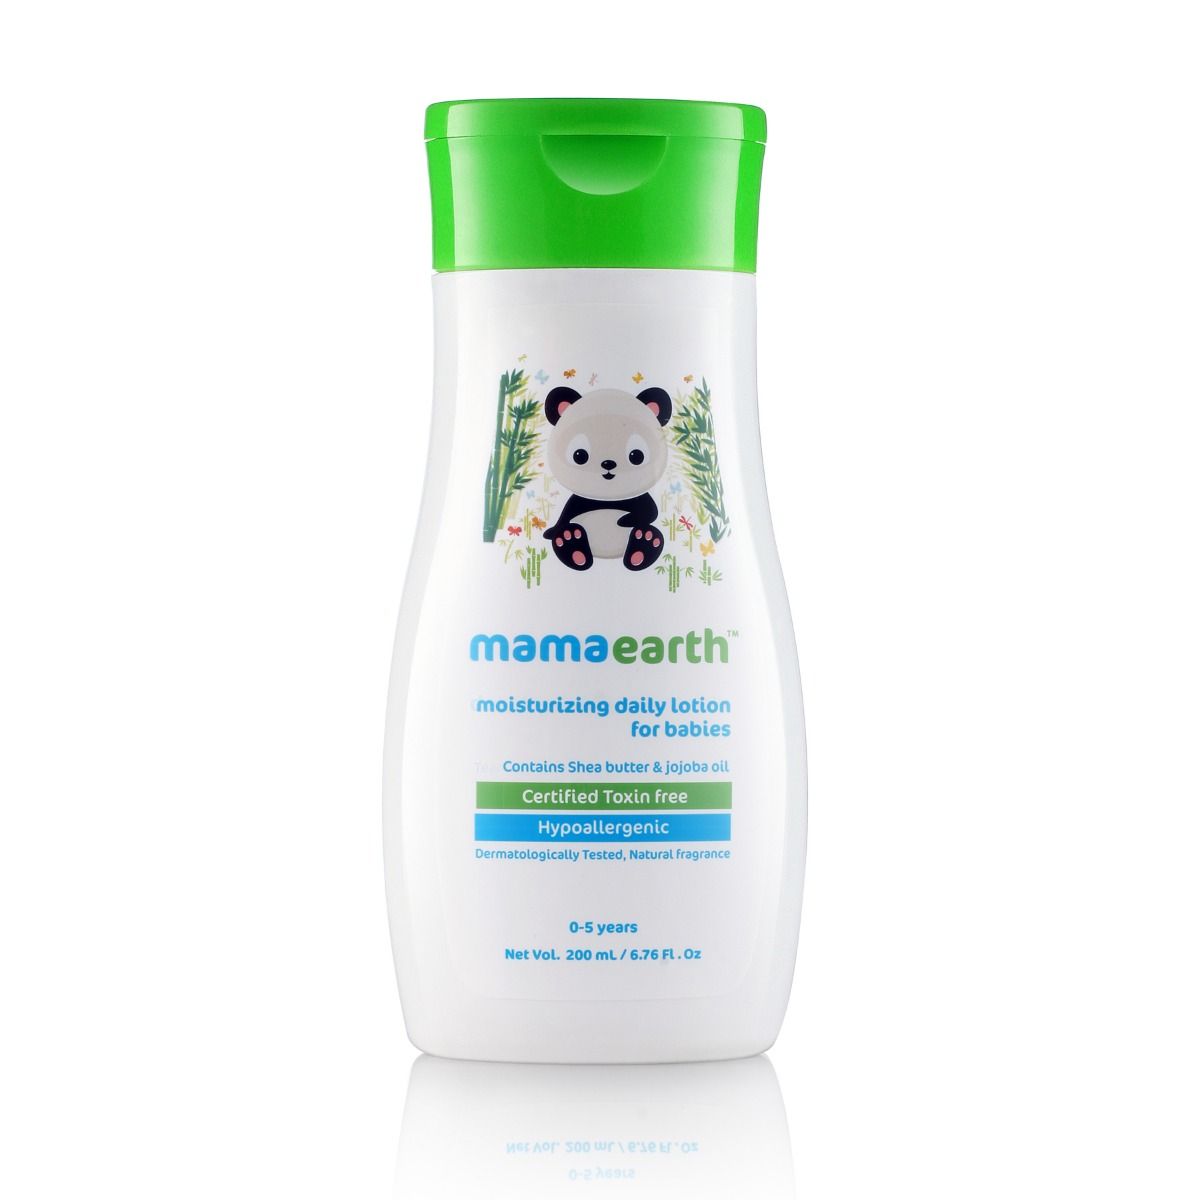 Buy Mamaearth Daily Moisturizing Lotion For Babies with Shea Butter & jojoba Oil, 0 to 5 Years, 200 ml Online